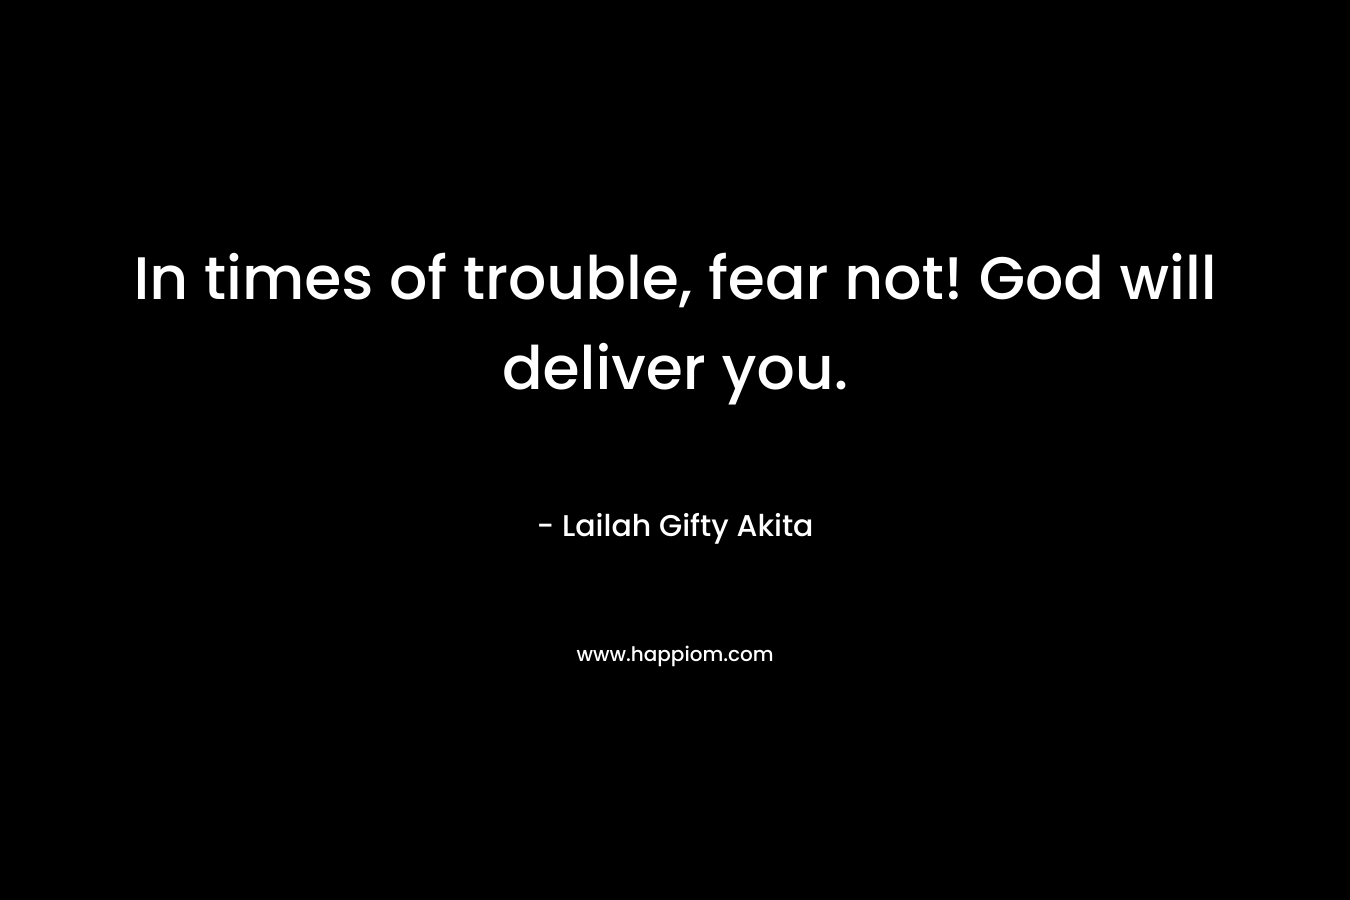 In times of trouble, fear not! God will deliver you.